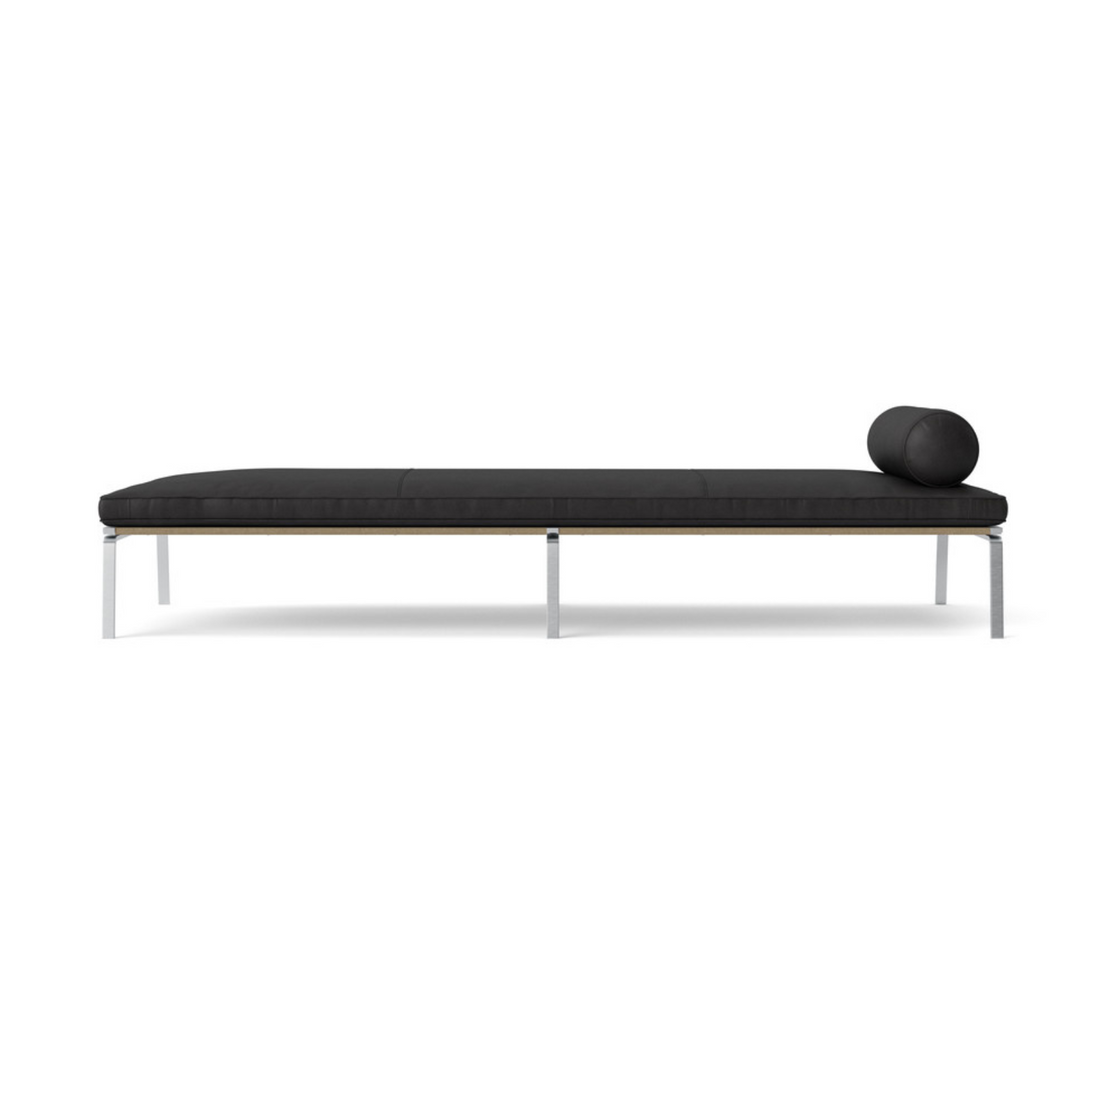 Man | Daybed